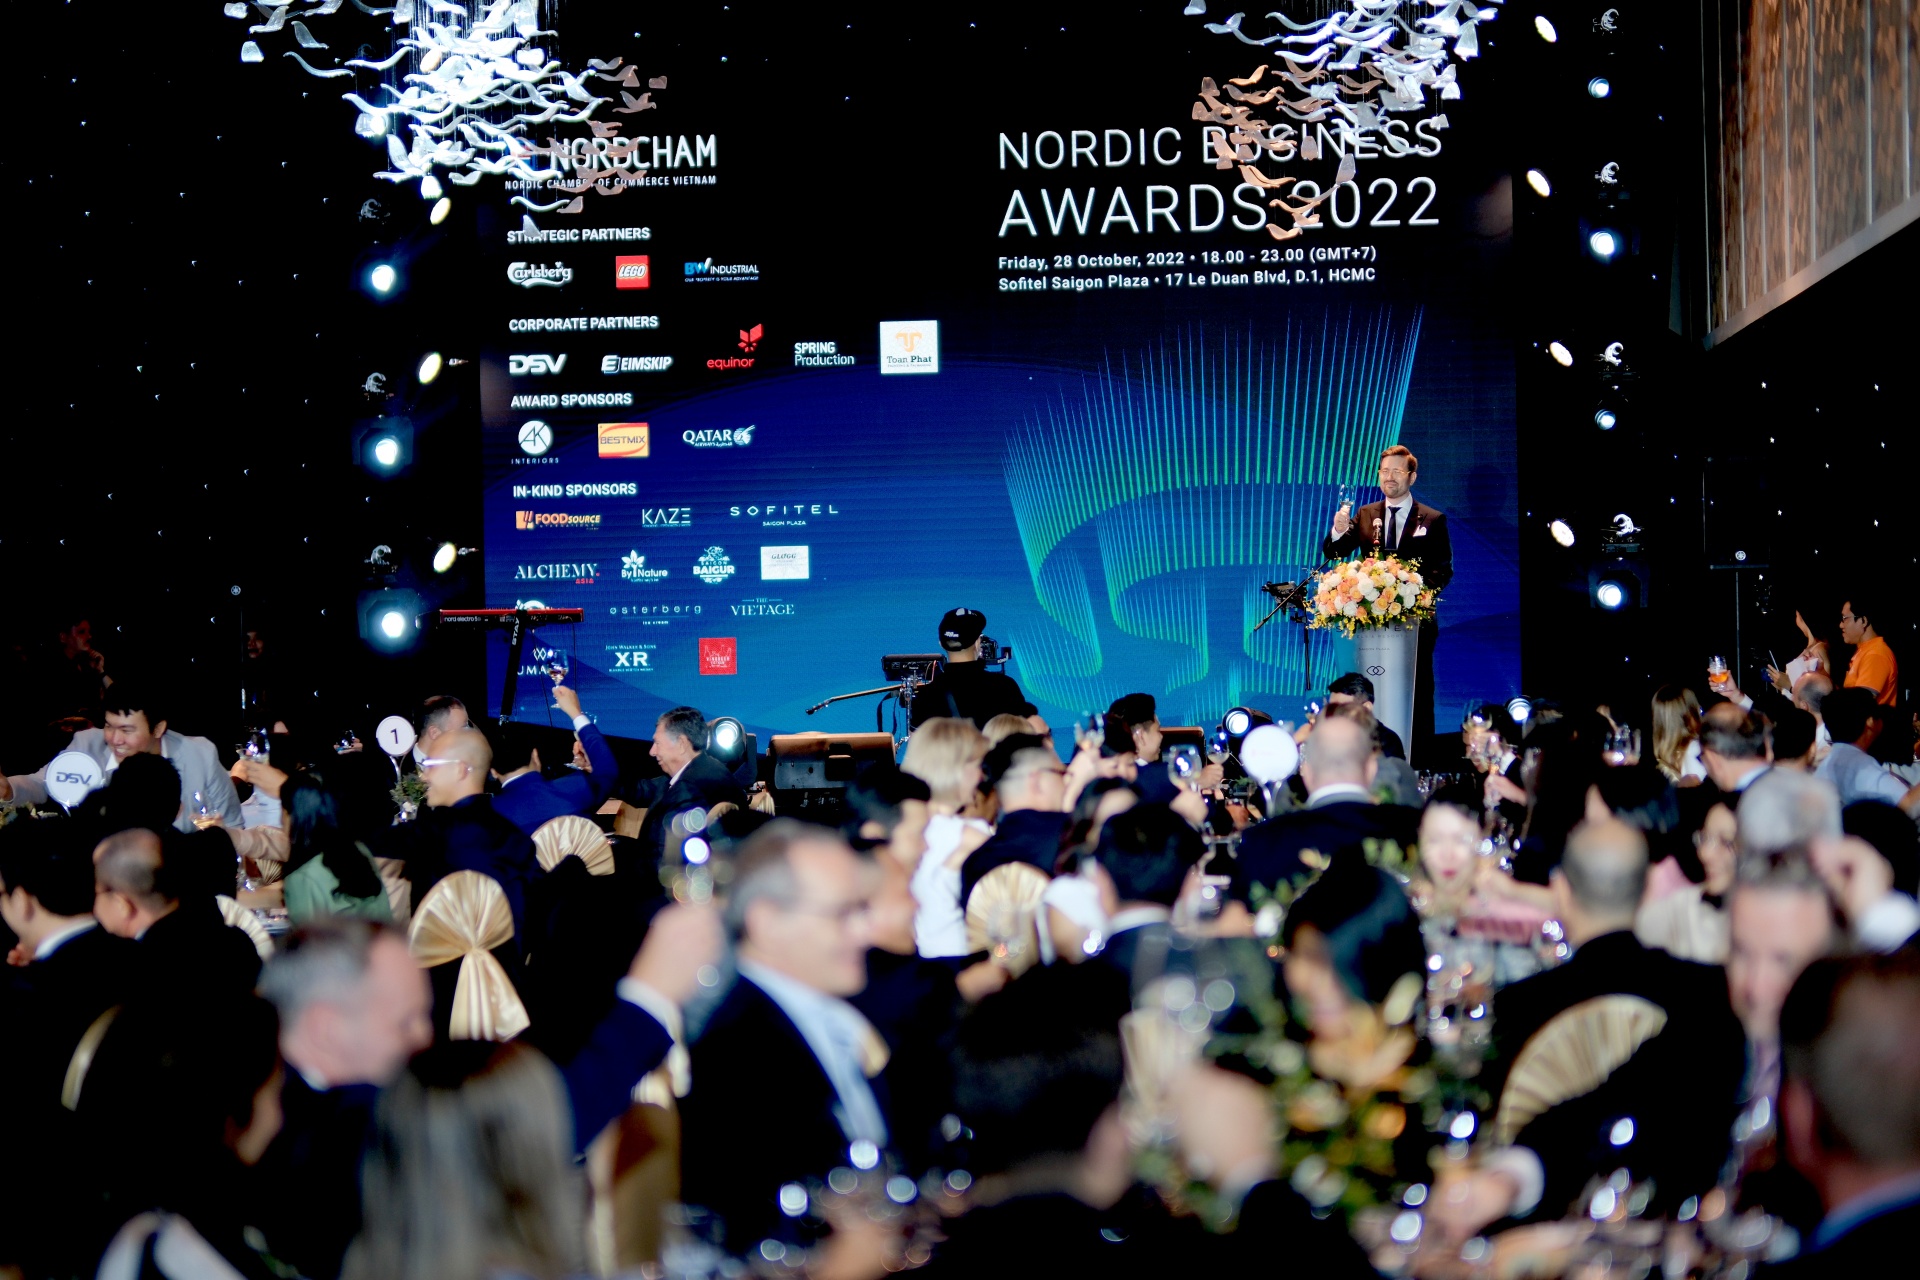 NordCham Awards highlight core values of Nordic countries and business communities